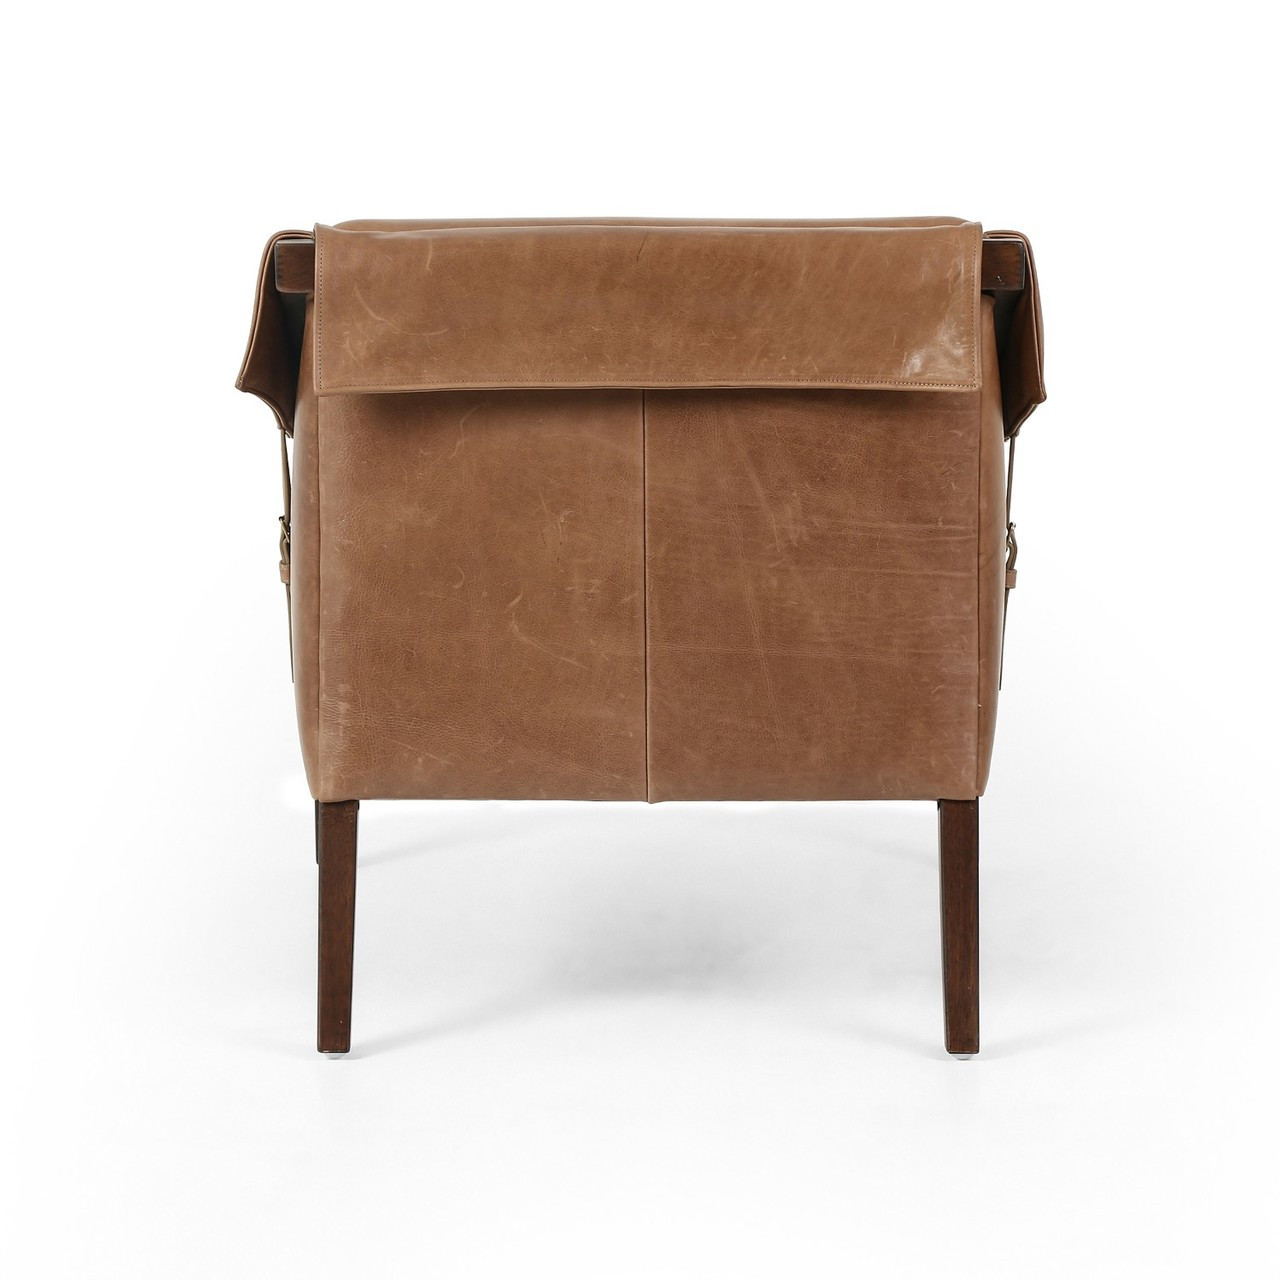 Bauer Mid-Century Tan Leather Club Chair | Zin Home - Fourhands